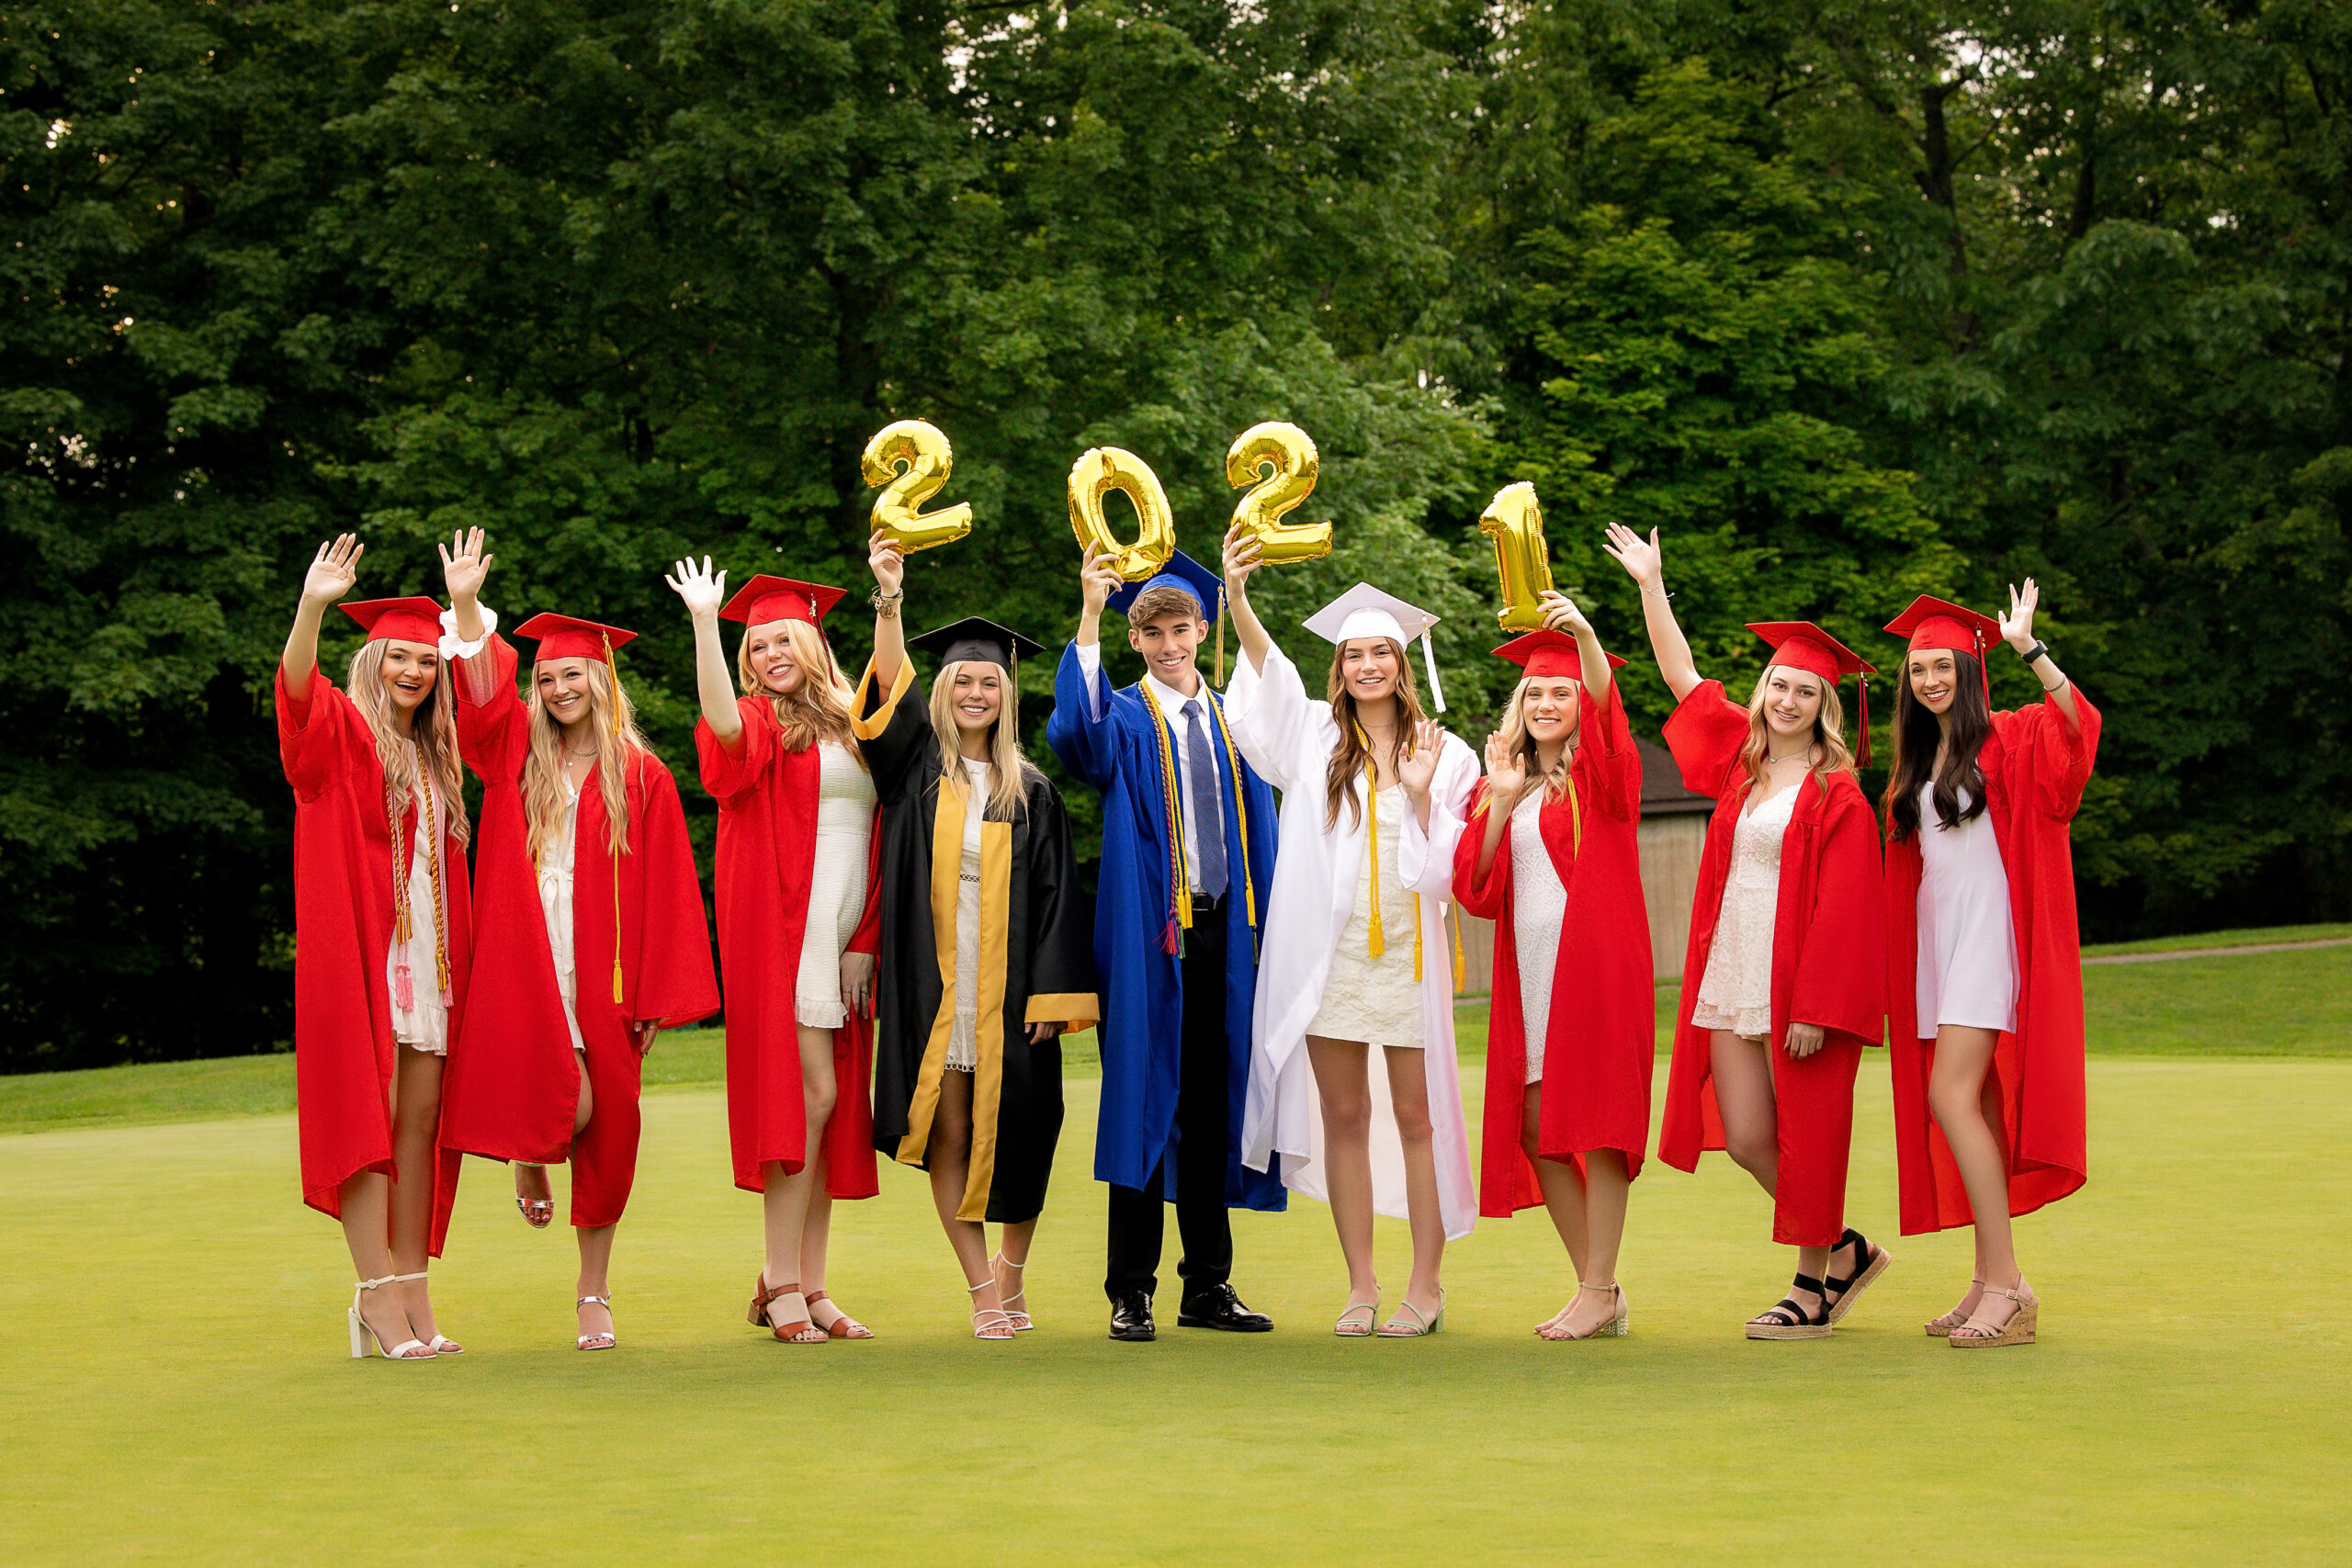 Fotofixation-Photography-Pittsburgh_team pics-Cap & Gown-3485